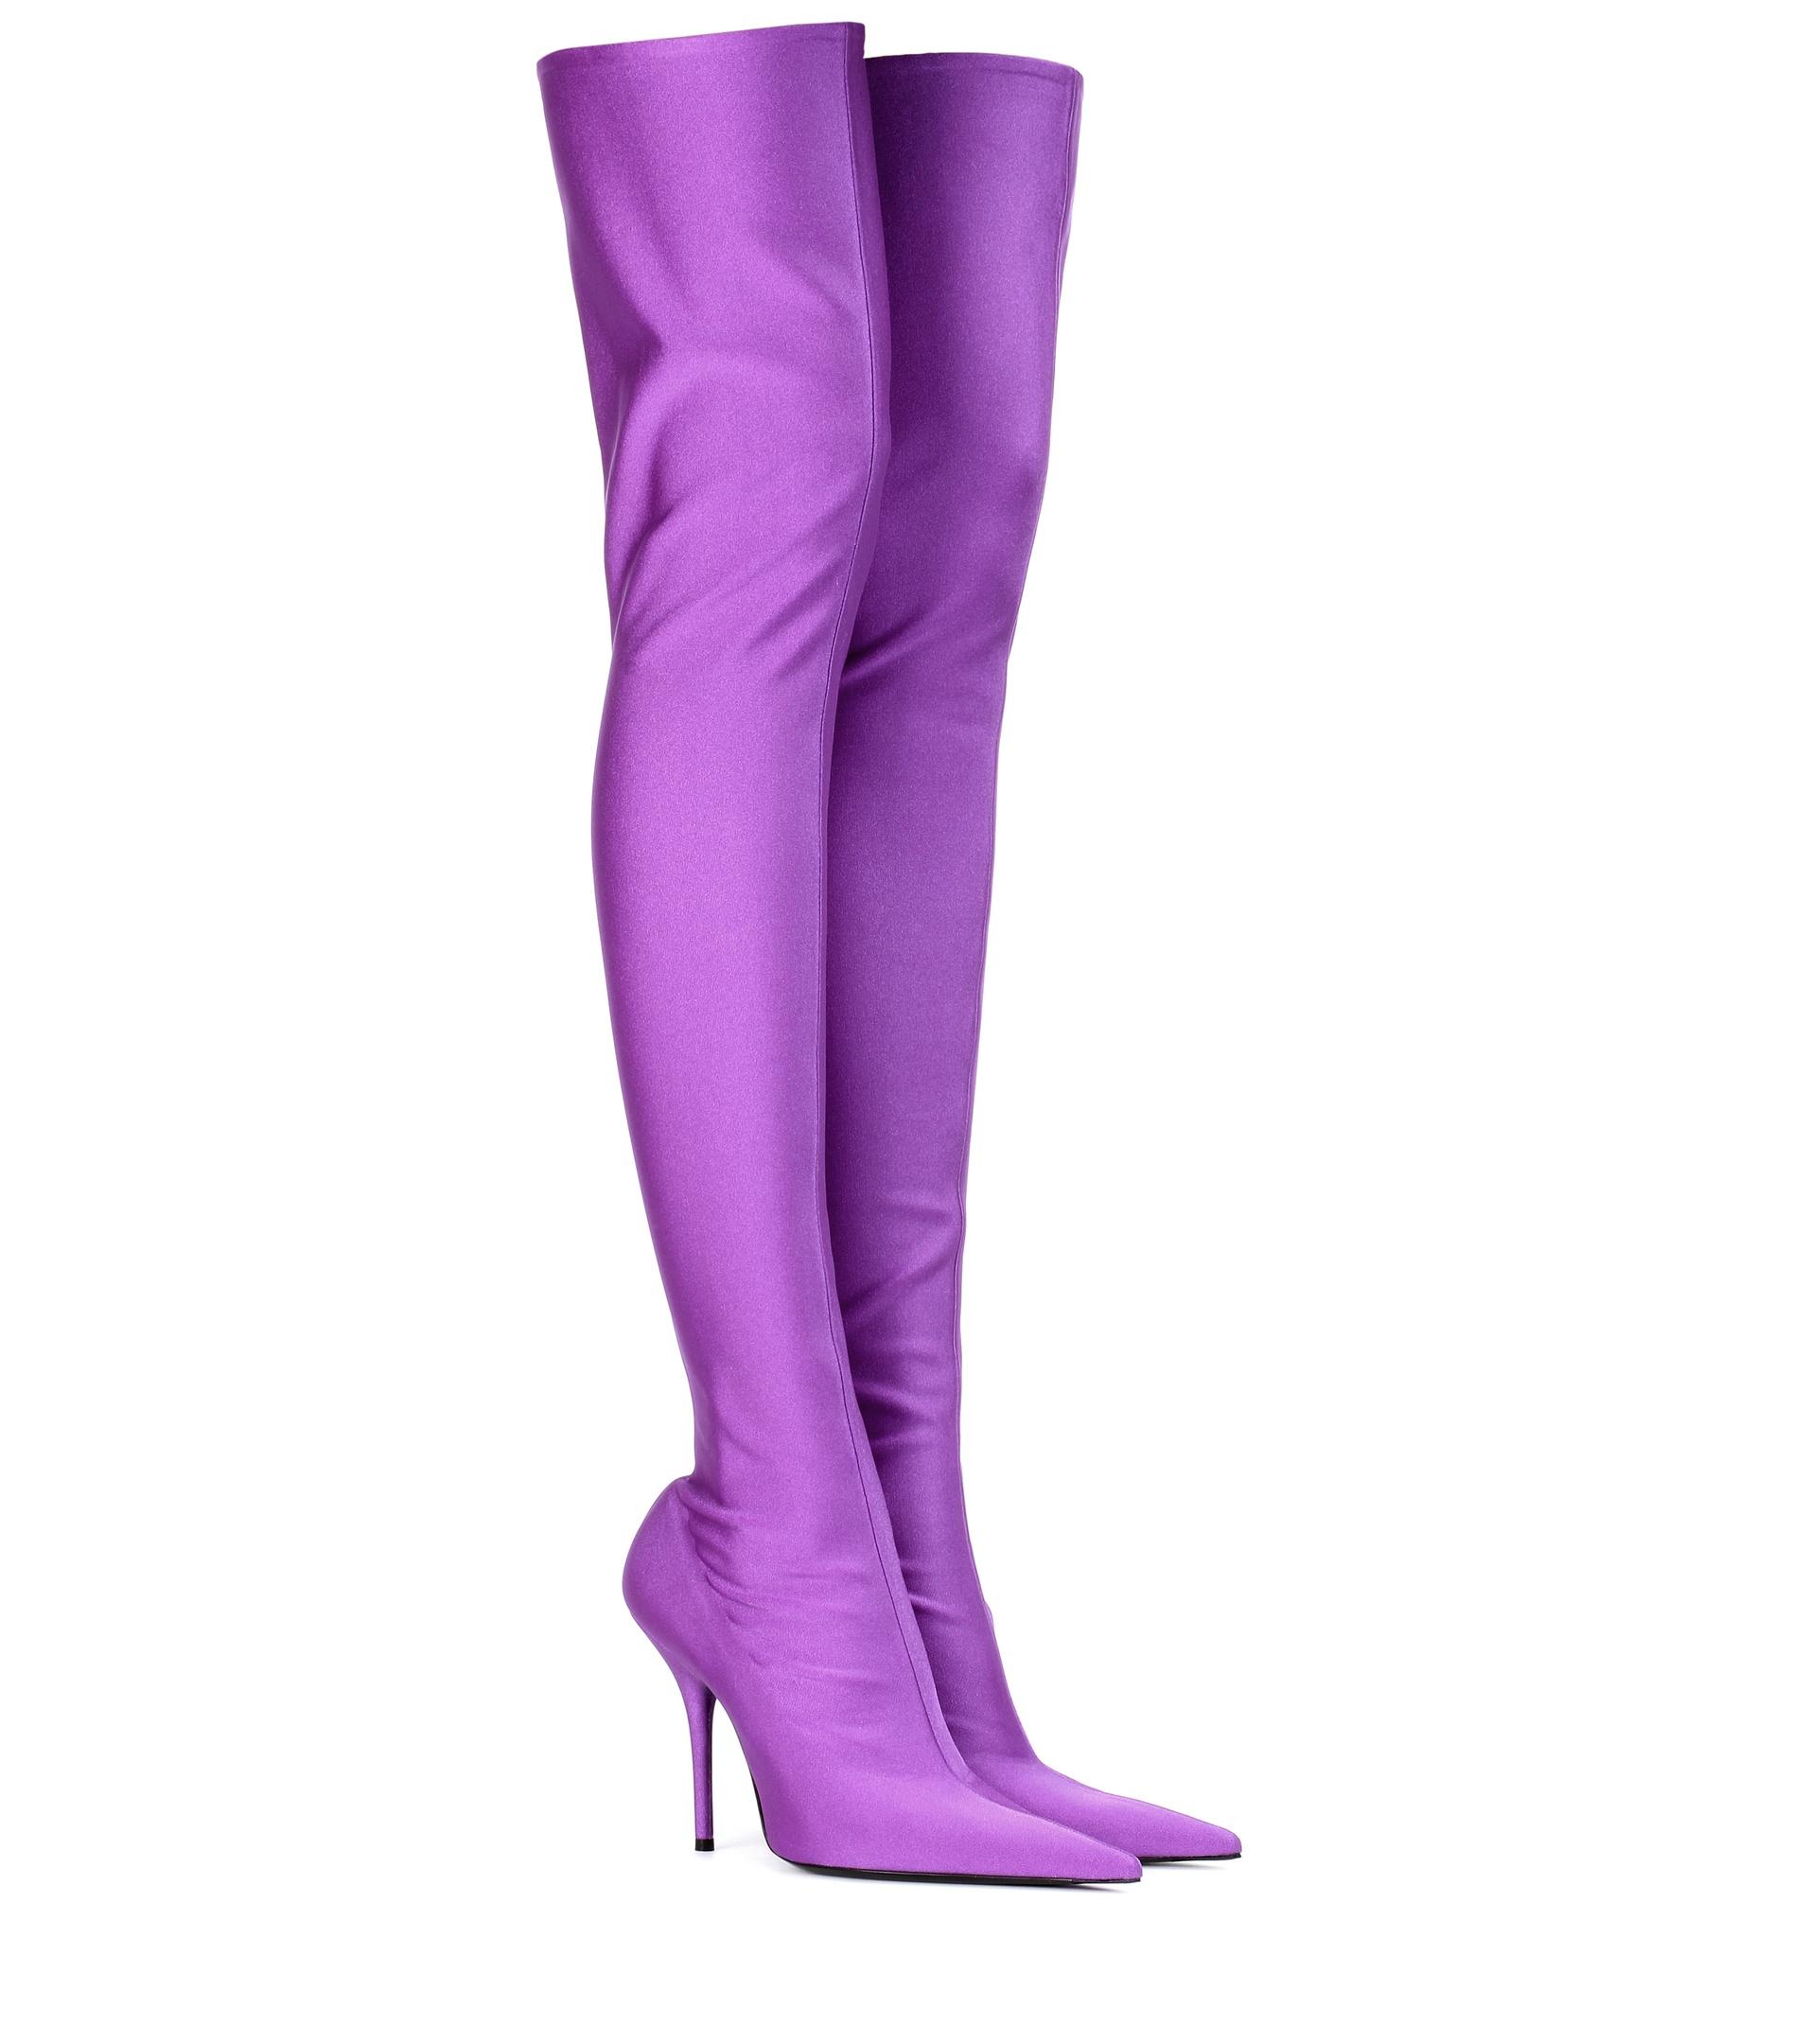 Balenciaga Synthetic Over-the-knee Spandex Boot in Purple | Lyst